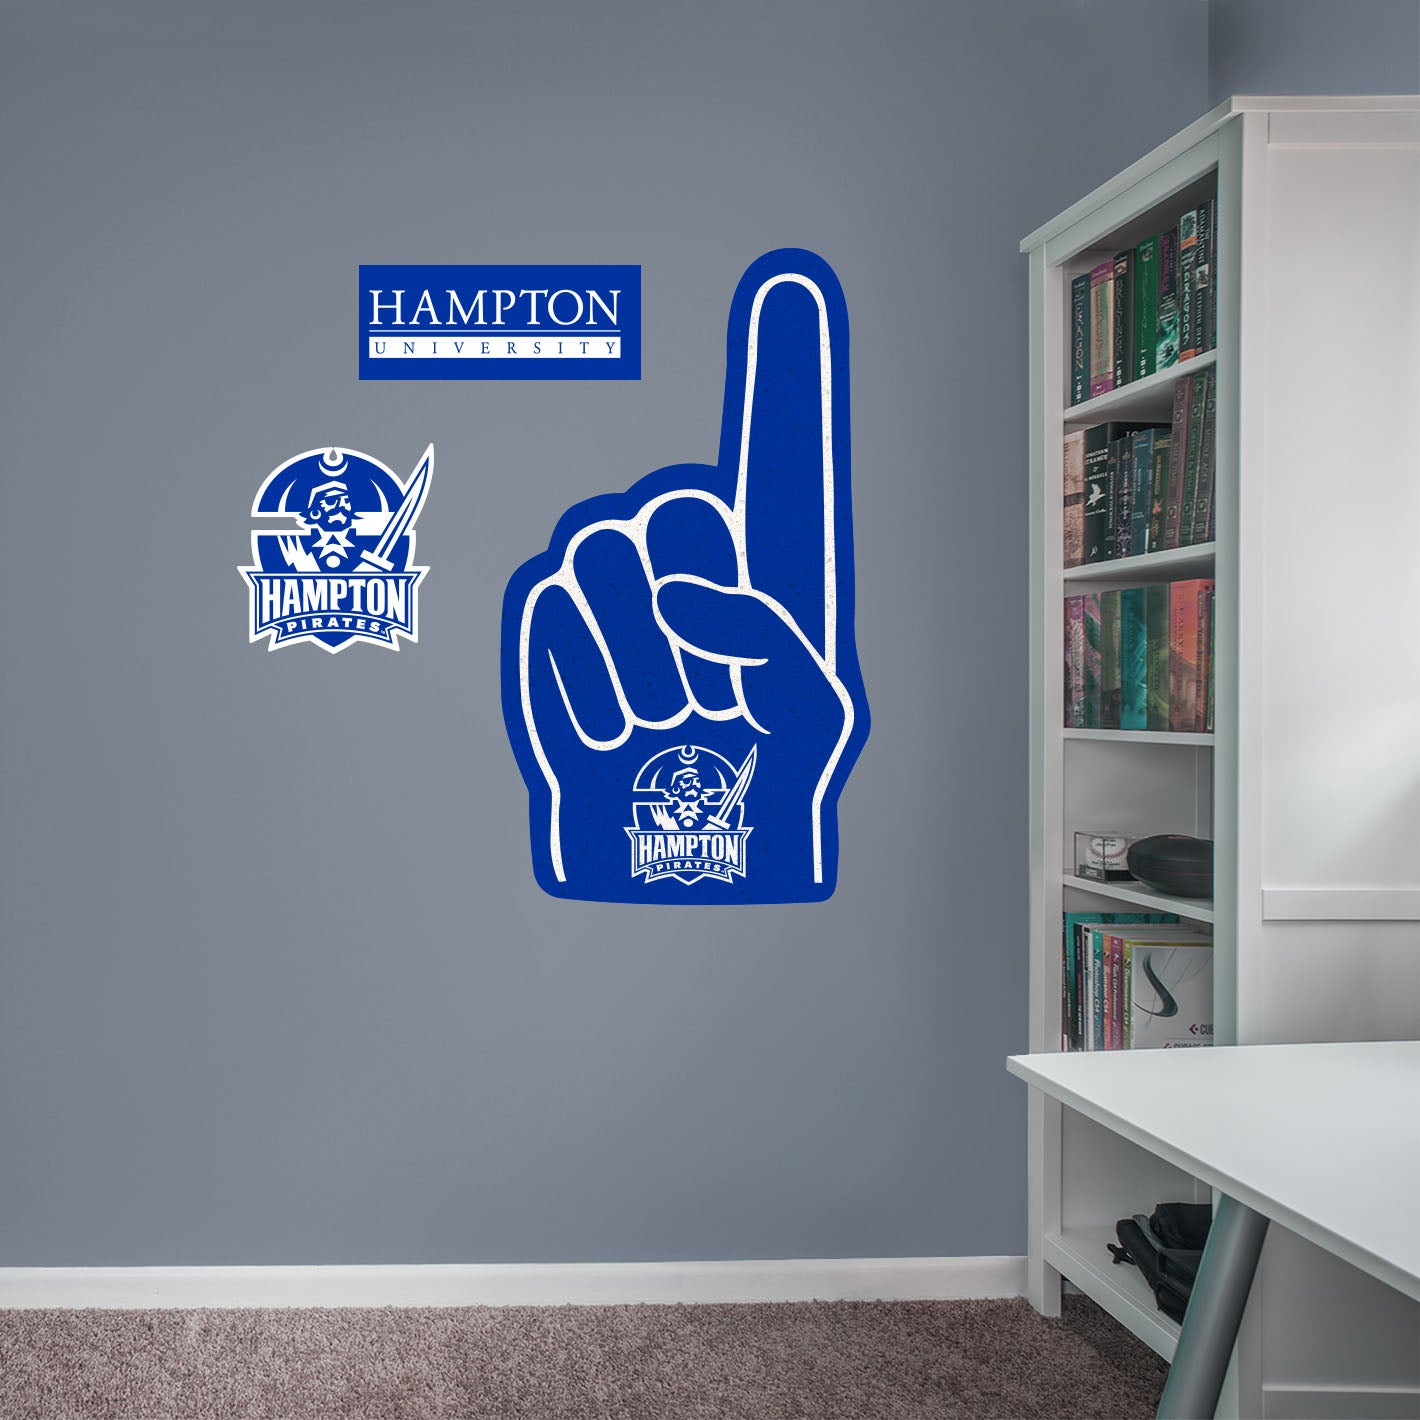 Hampton Pirates: Foam Finger - Officially Licensed NCAA Removable Adhesive Decal